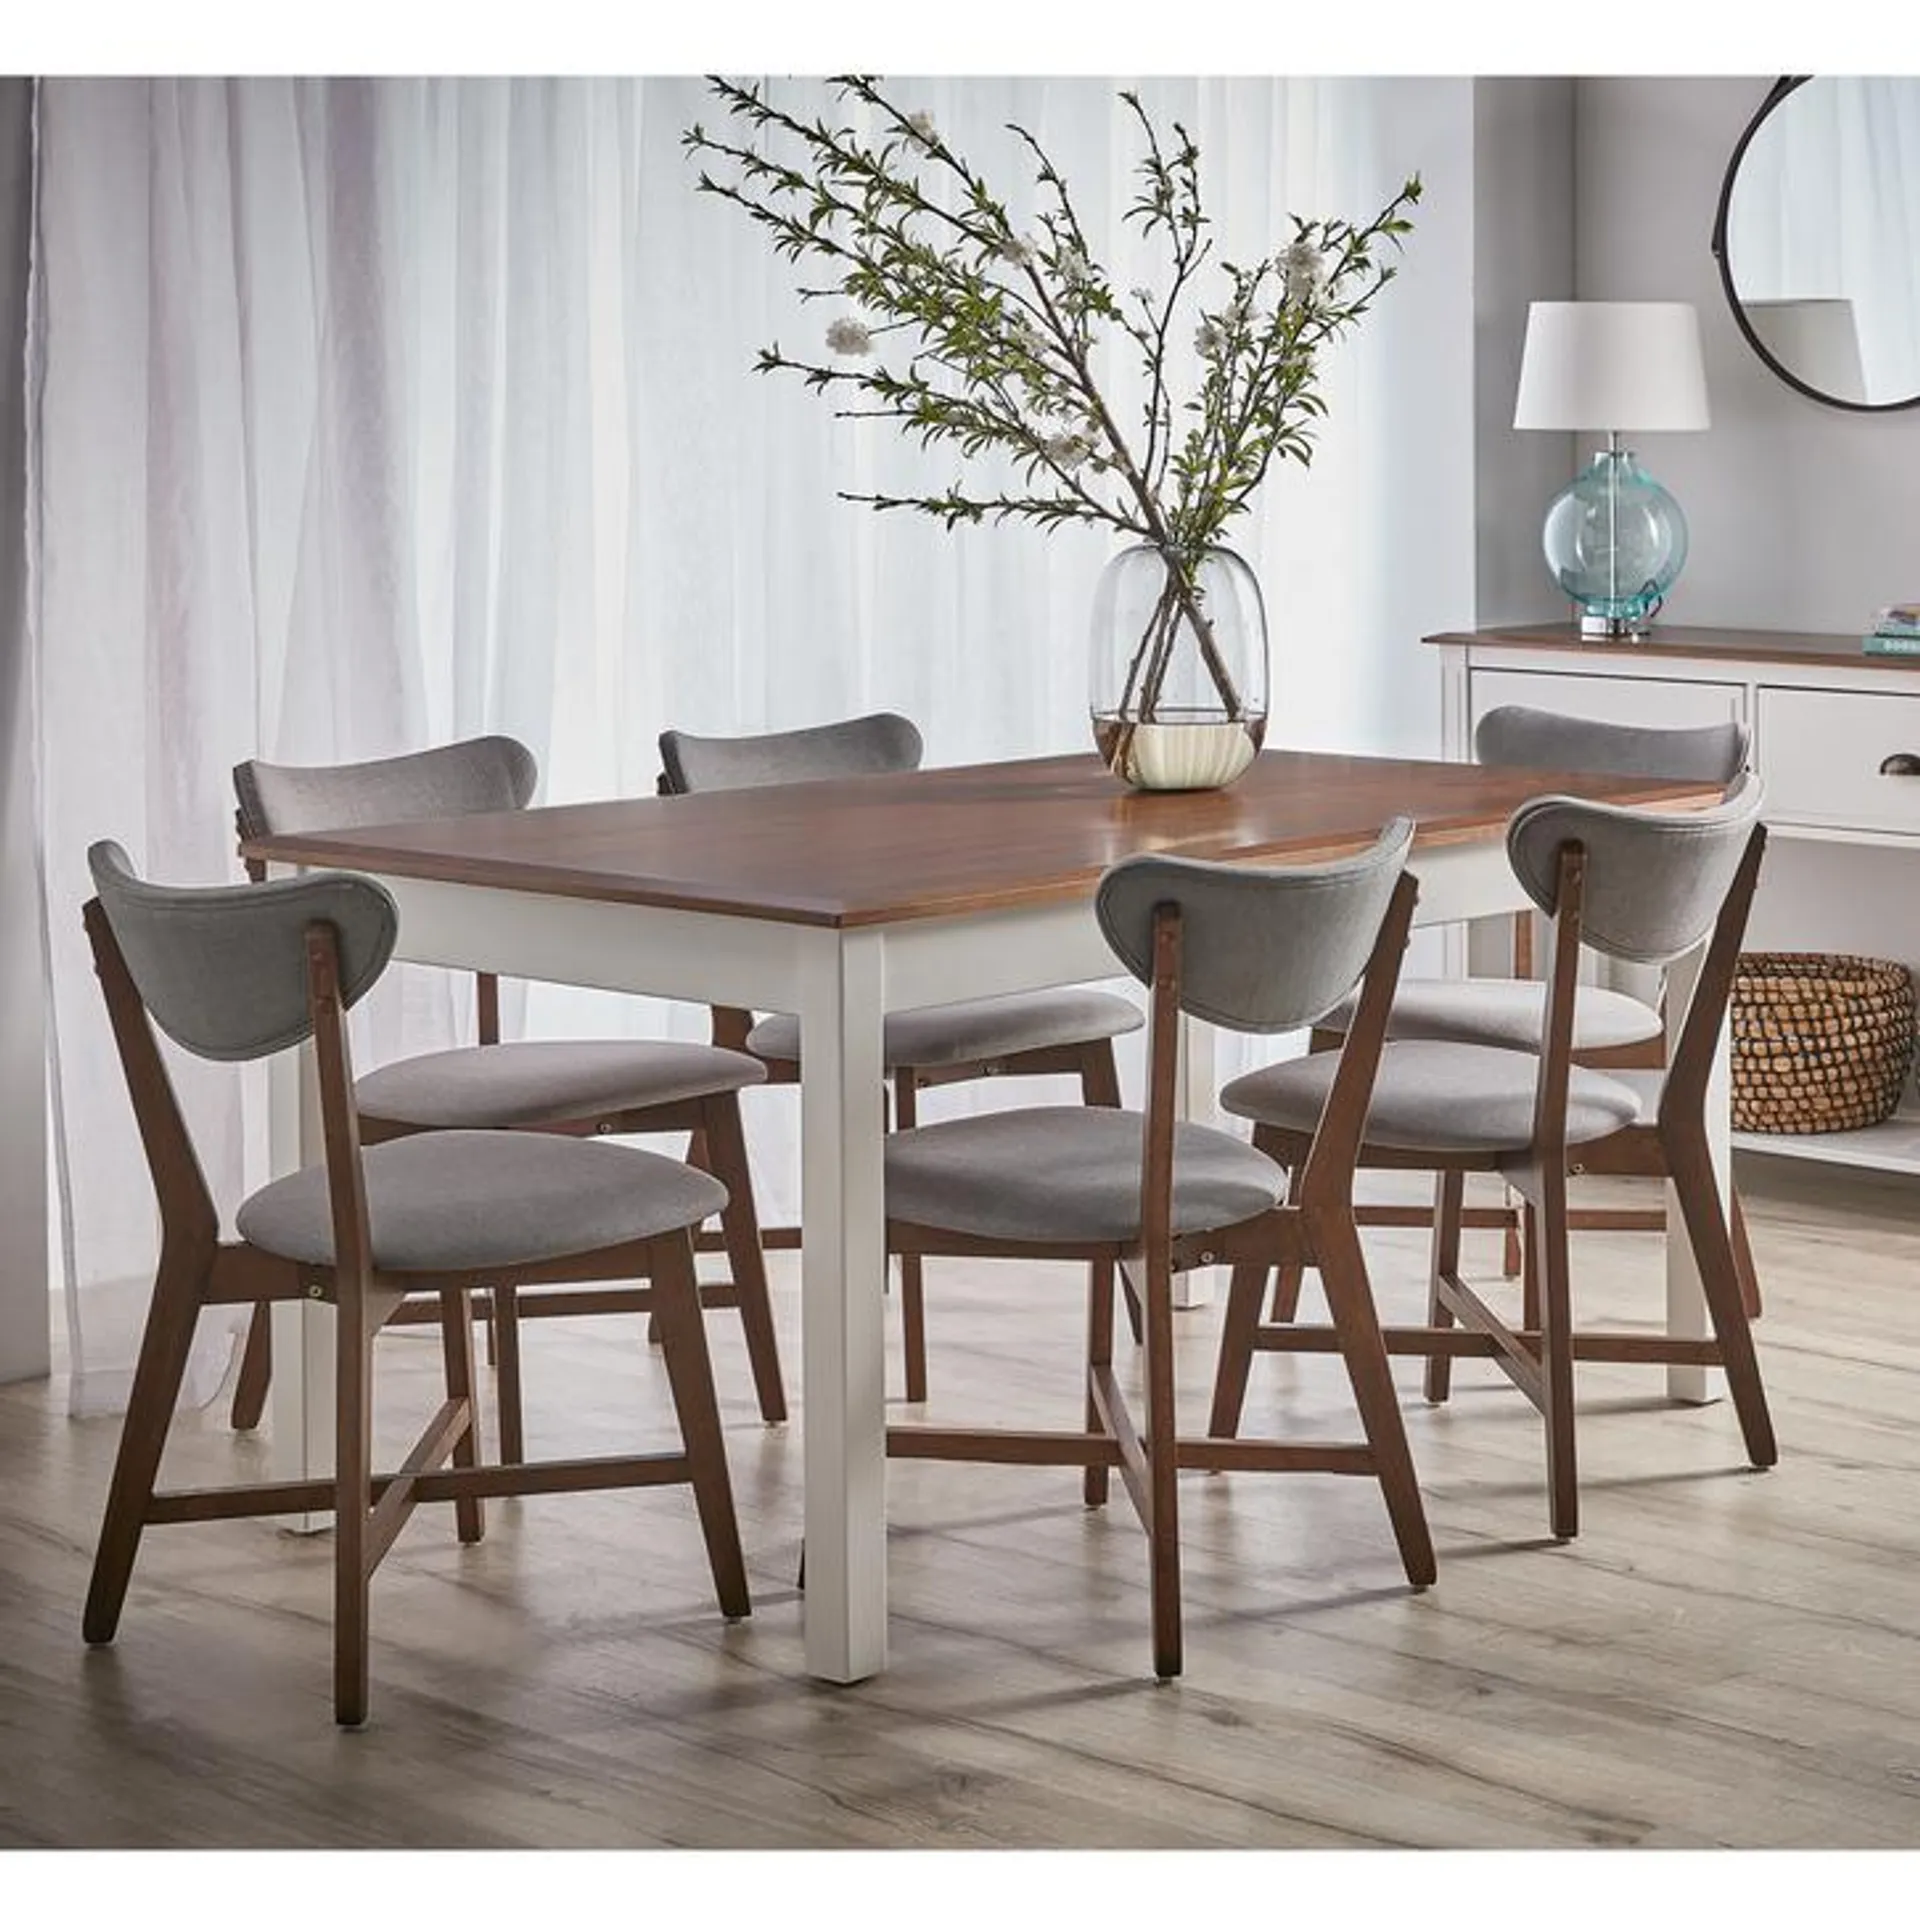 Torkay 6 Seater Dining Set With Elke Chairs